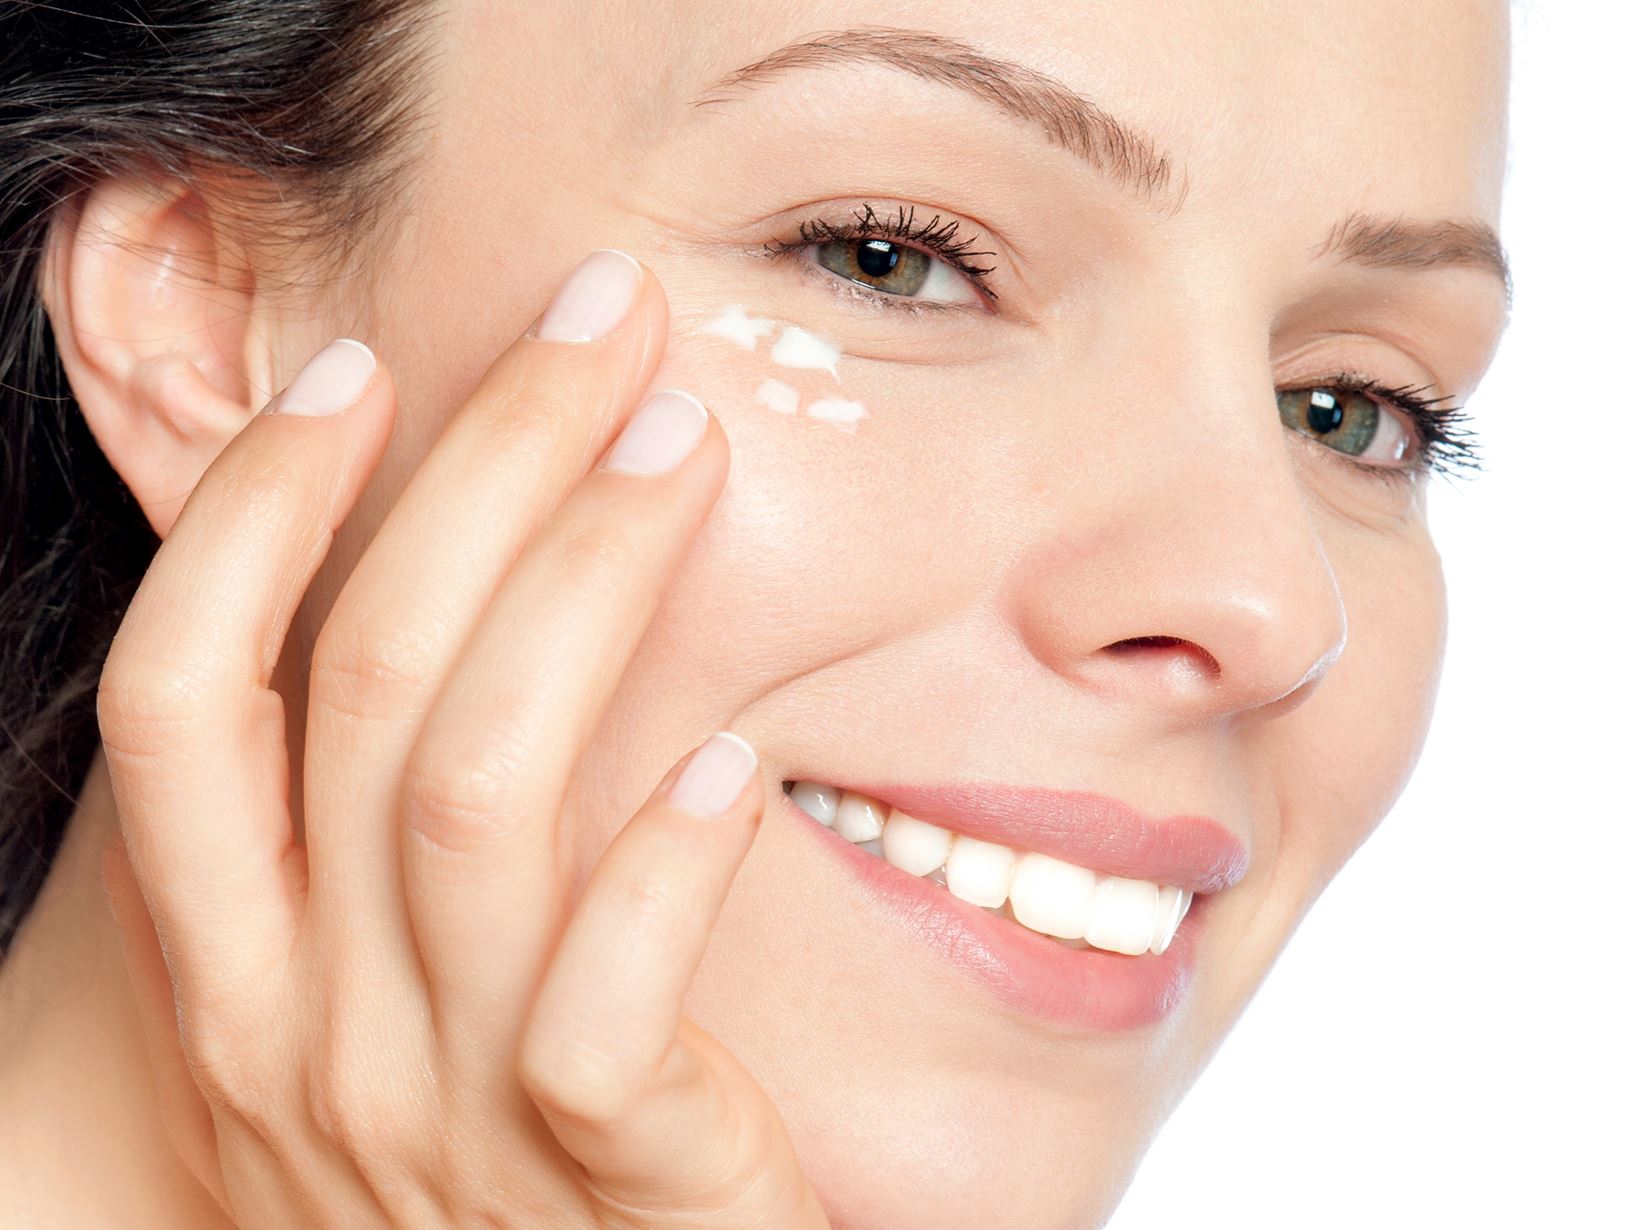 The best creams for swelling under the eyes for 2022